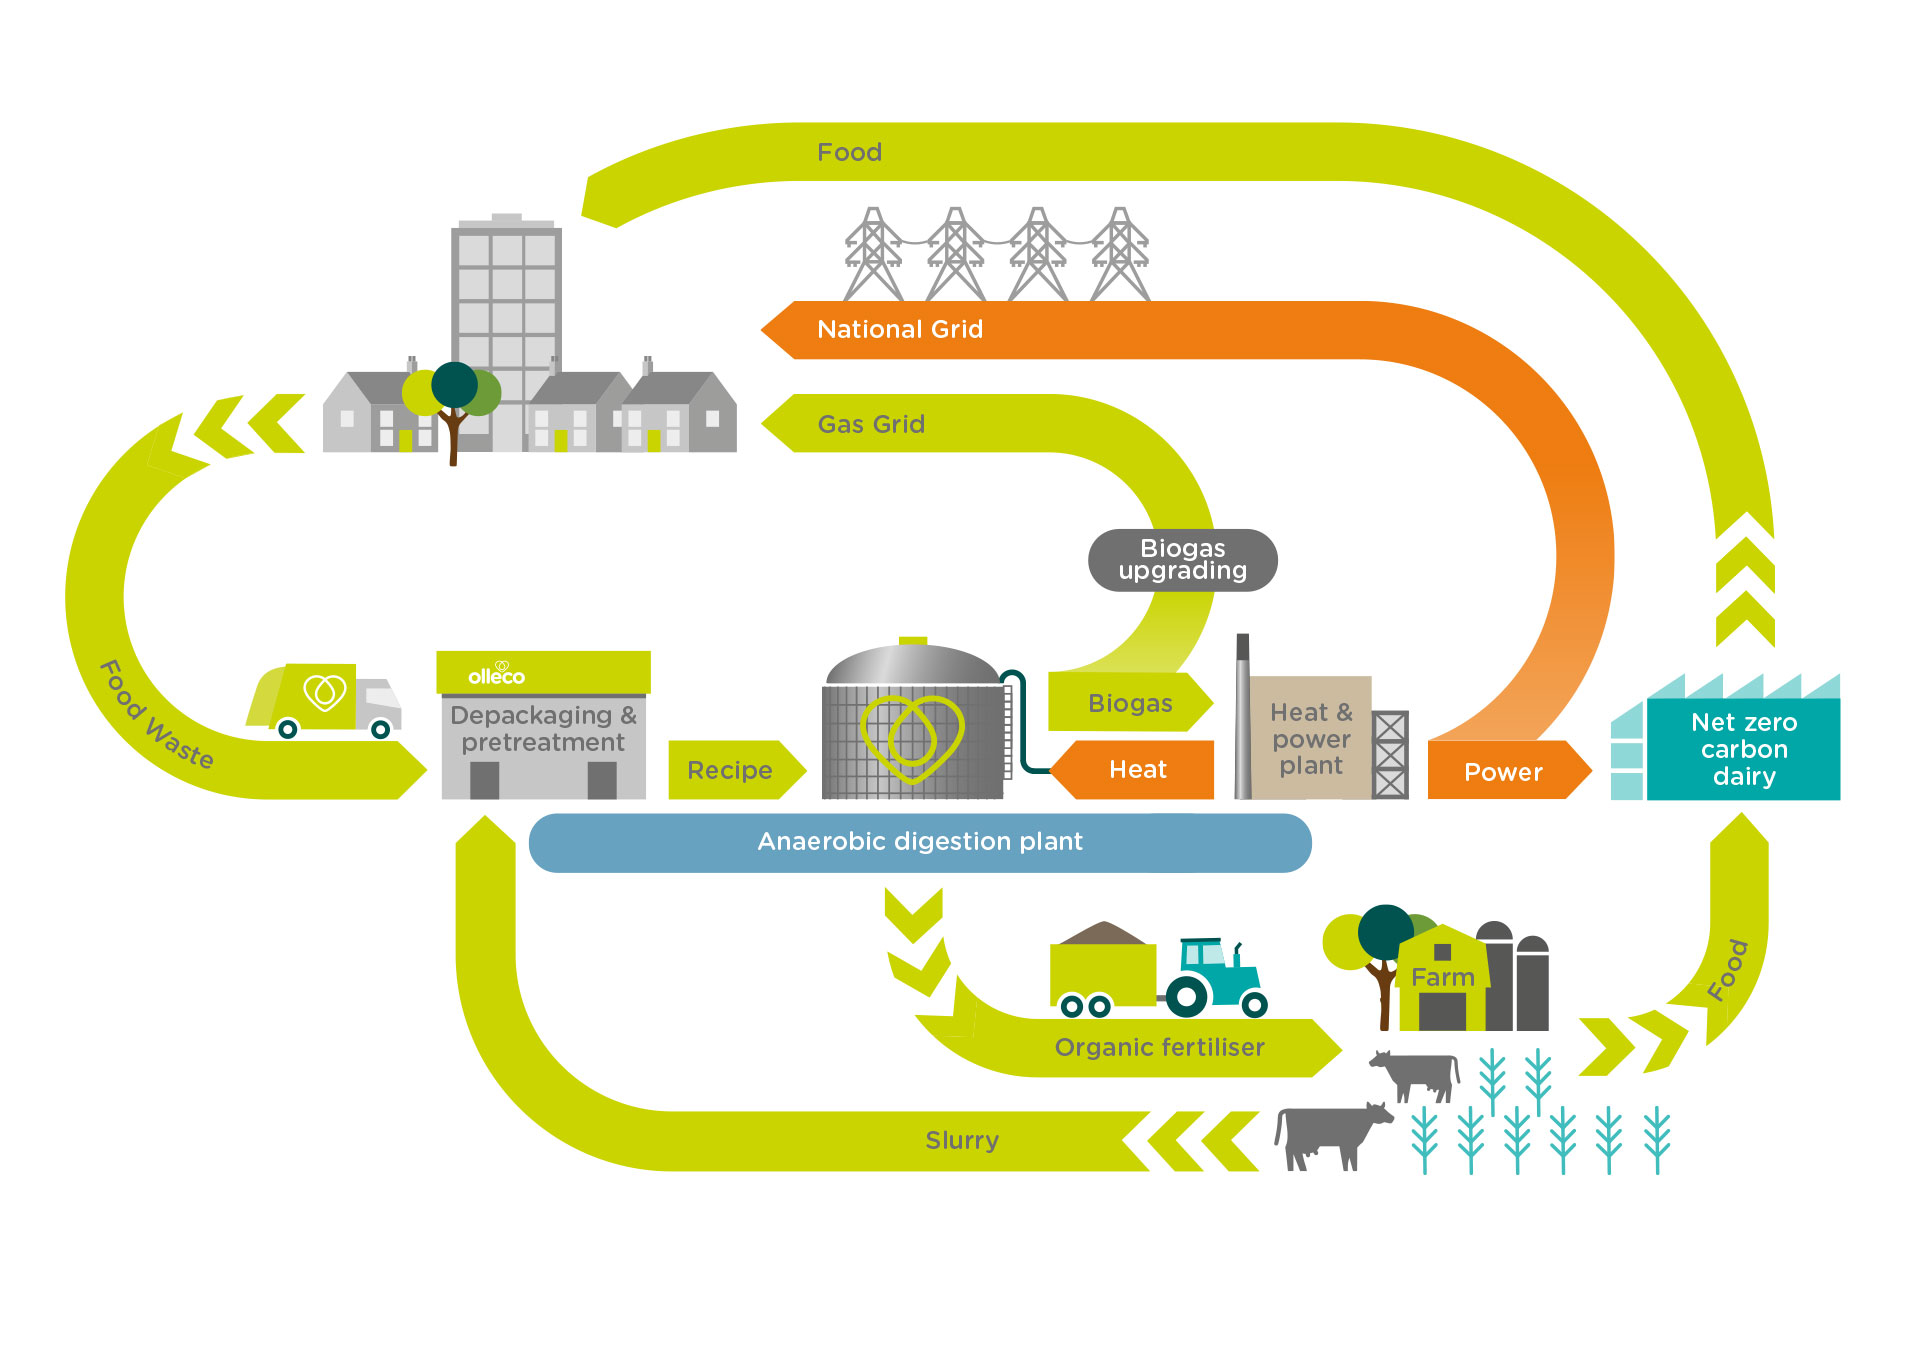 Image of the anaerobic digestion process